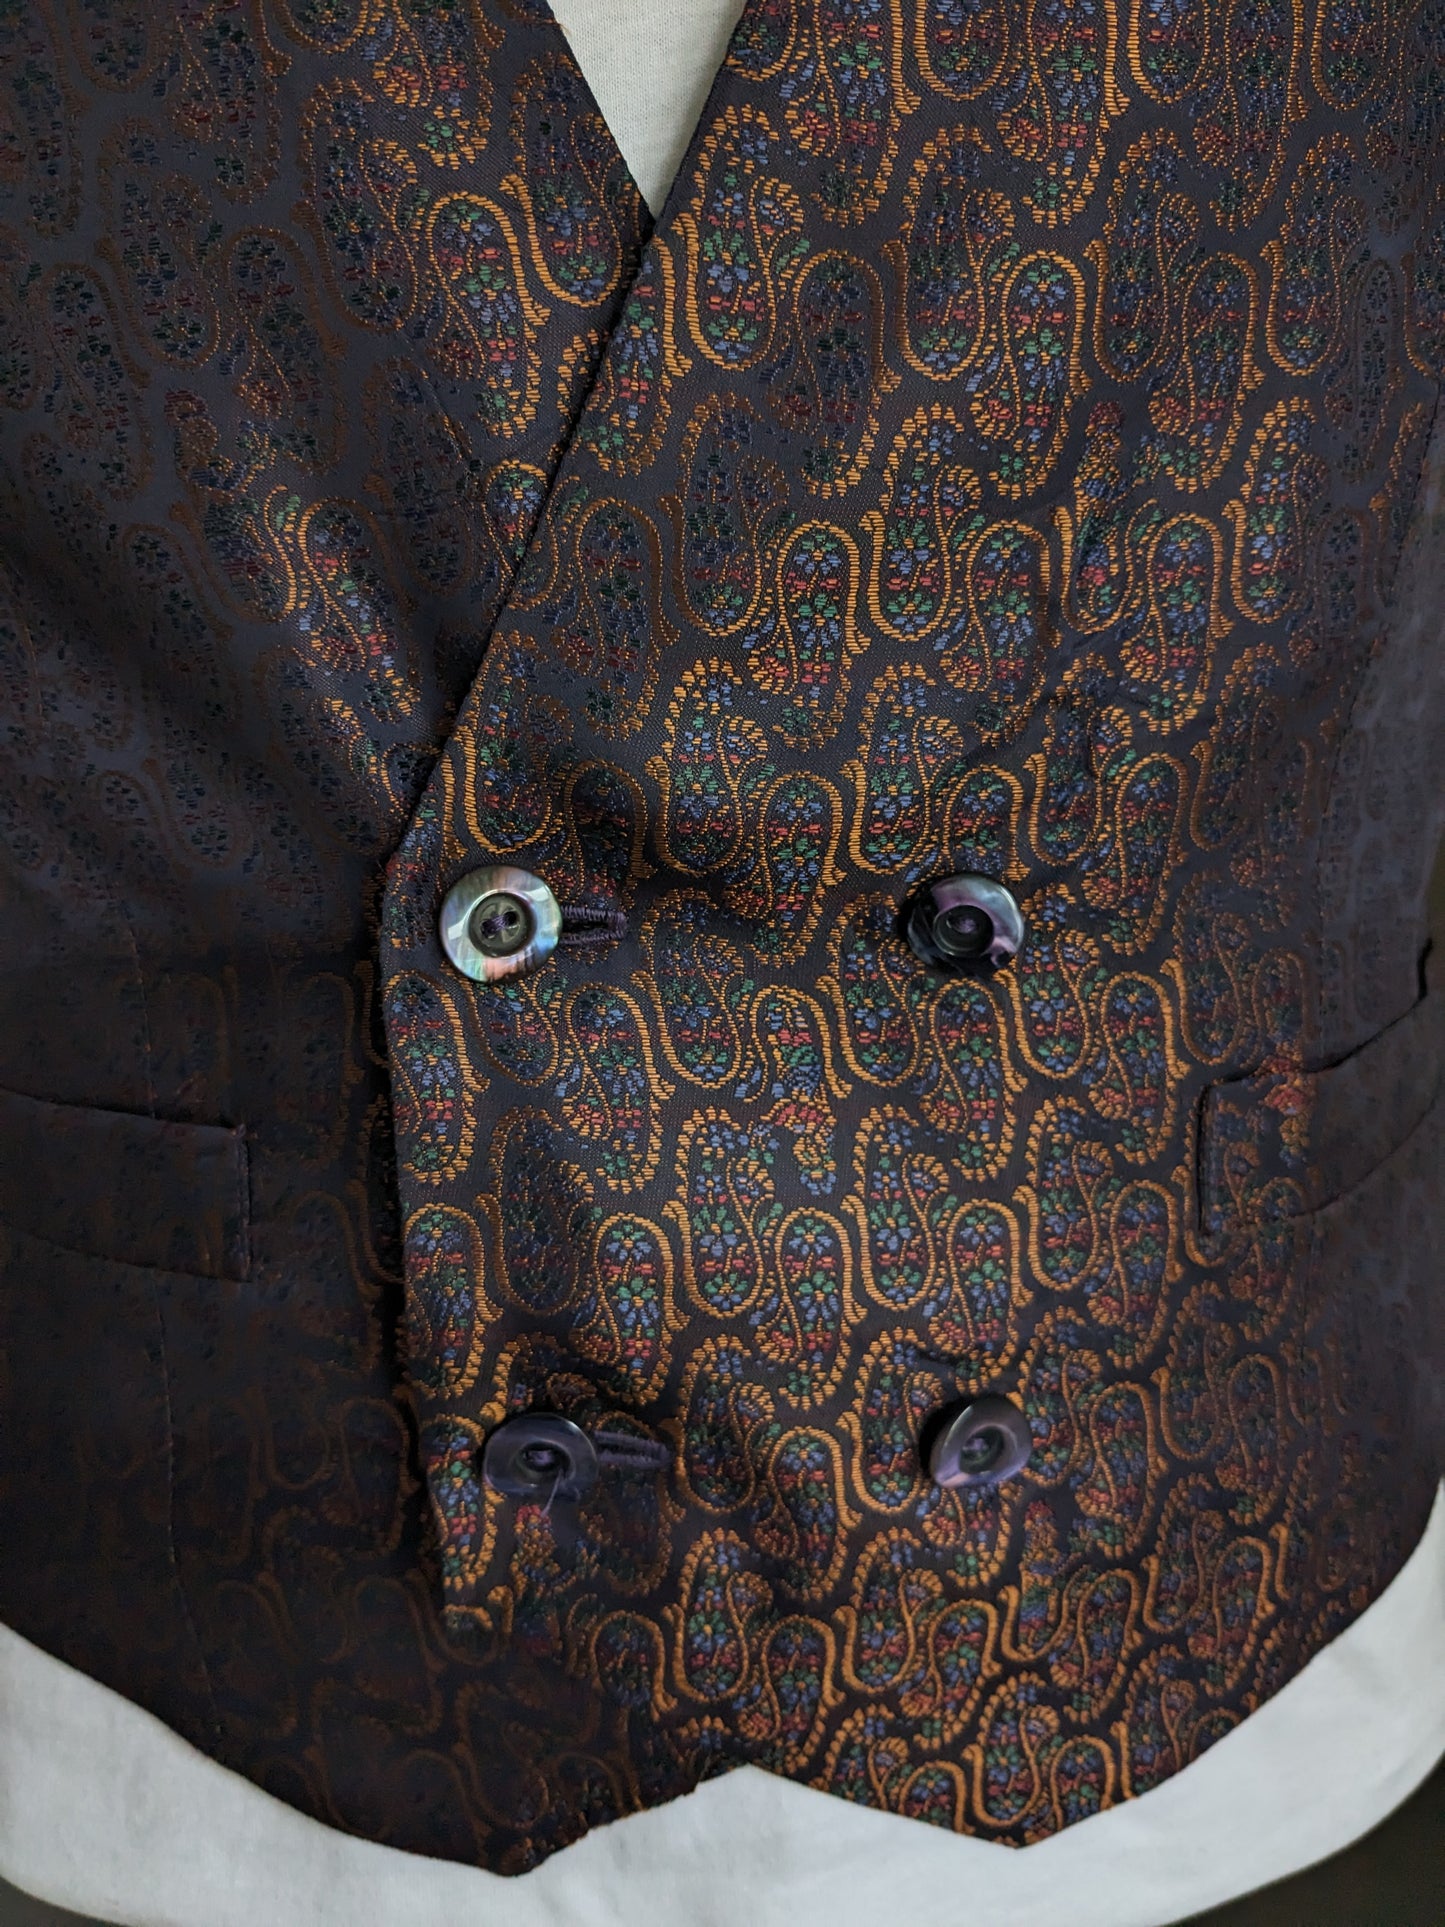 Double Breasted waistcoat. Purple brown shiny motif. Size S.